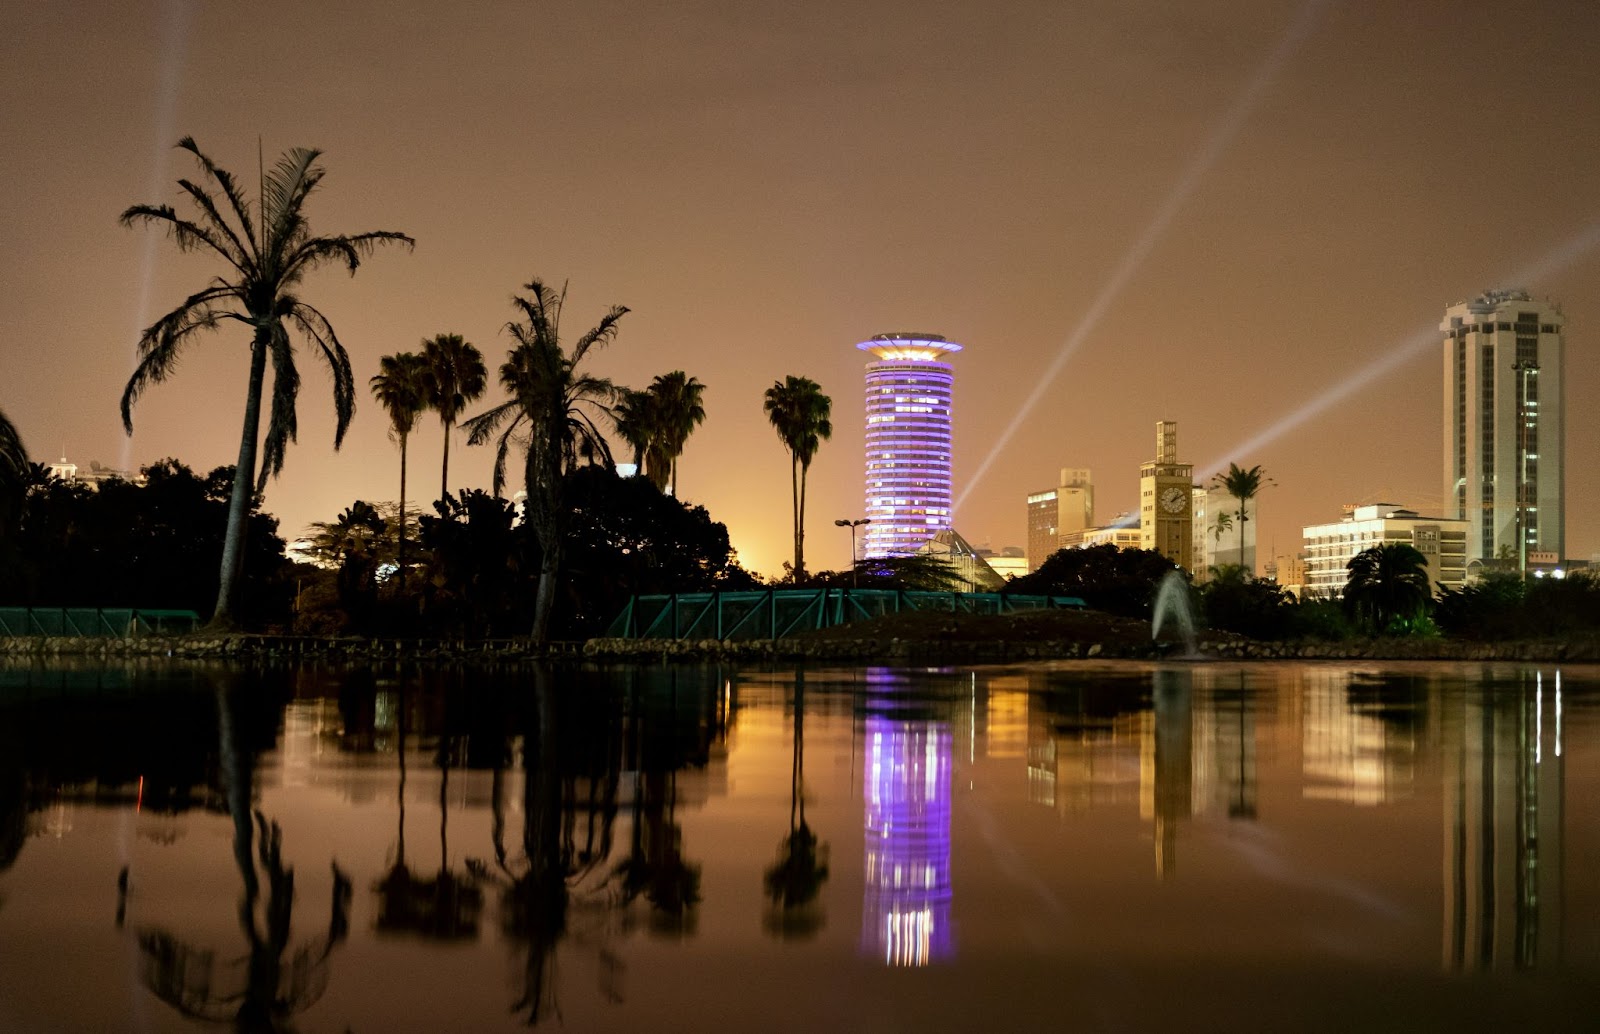 picture of the landscape of Nairobi, with a lake and palm trees and buildings